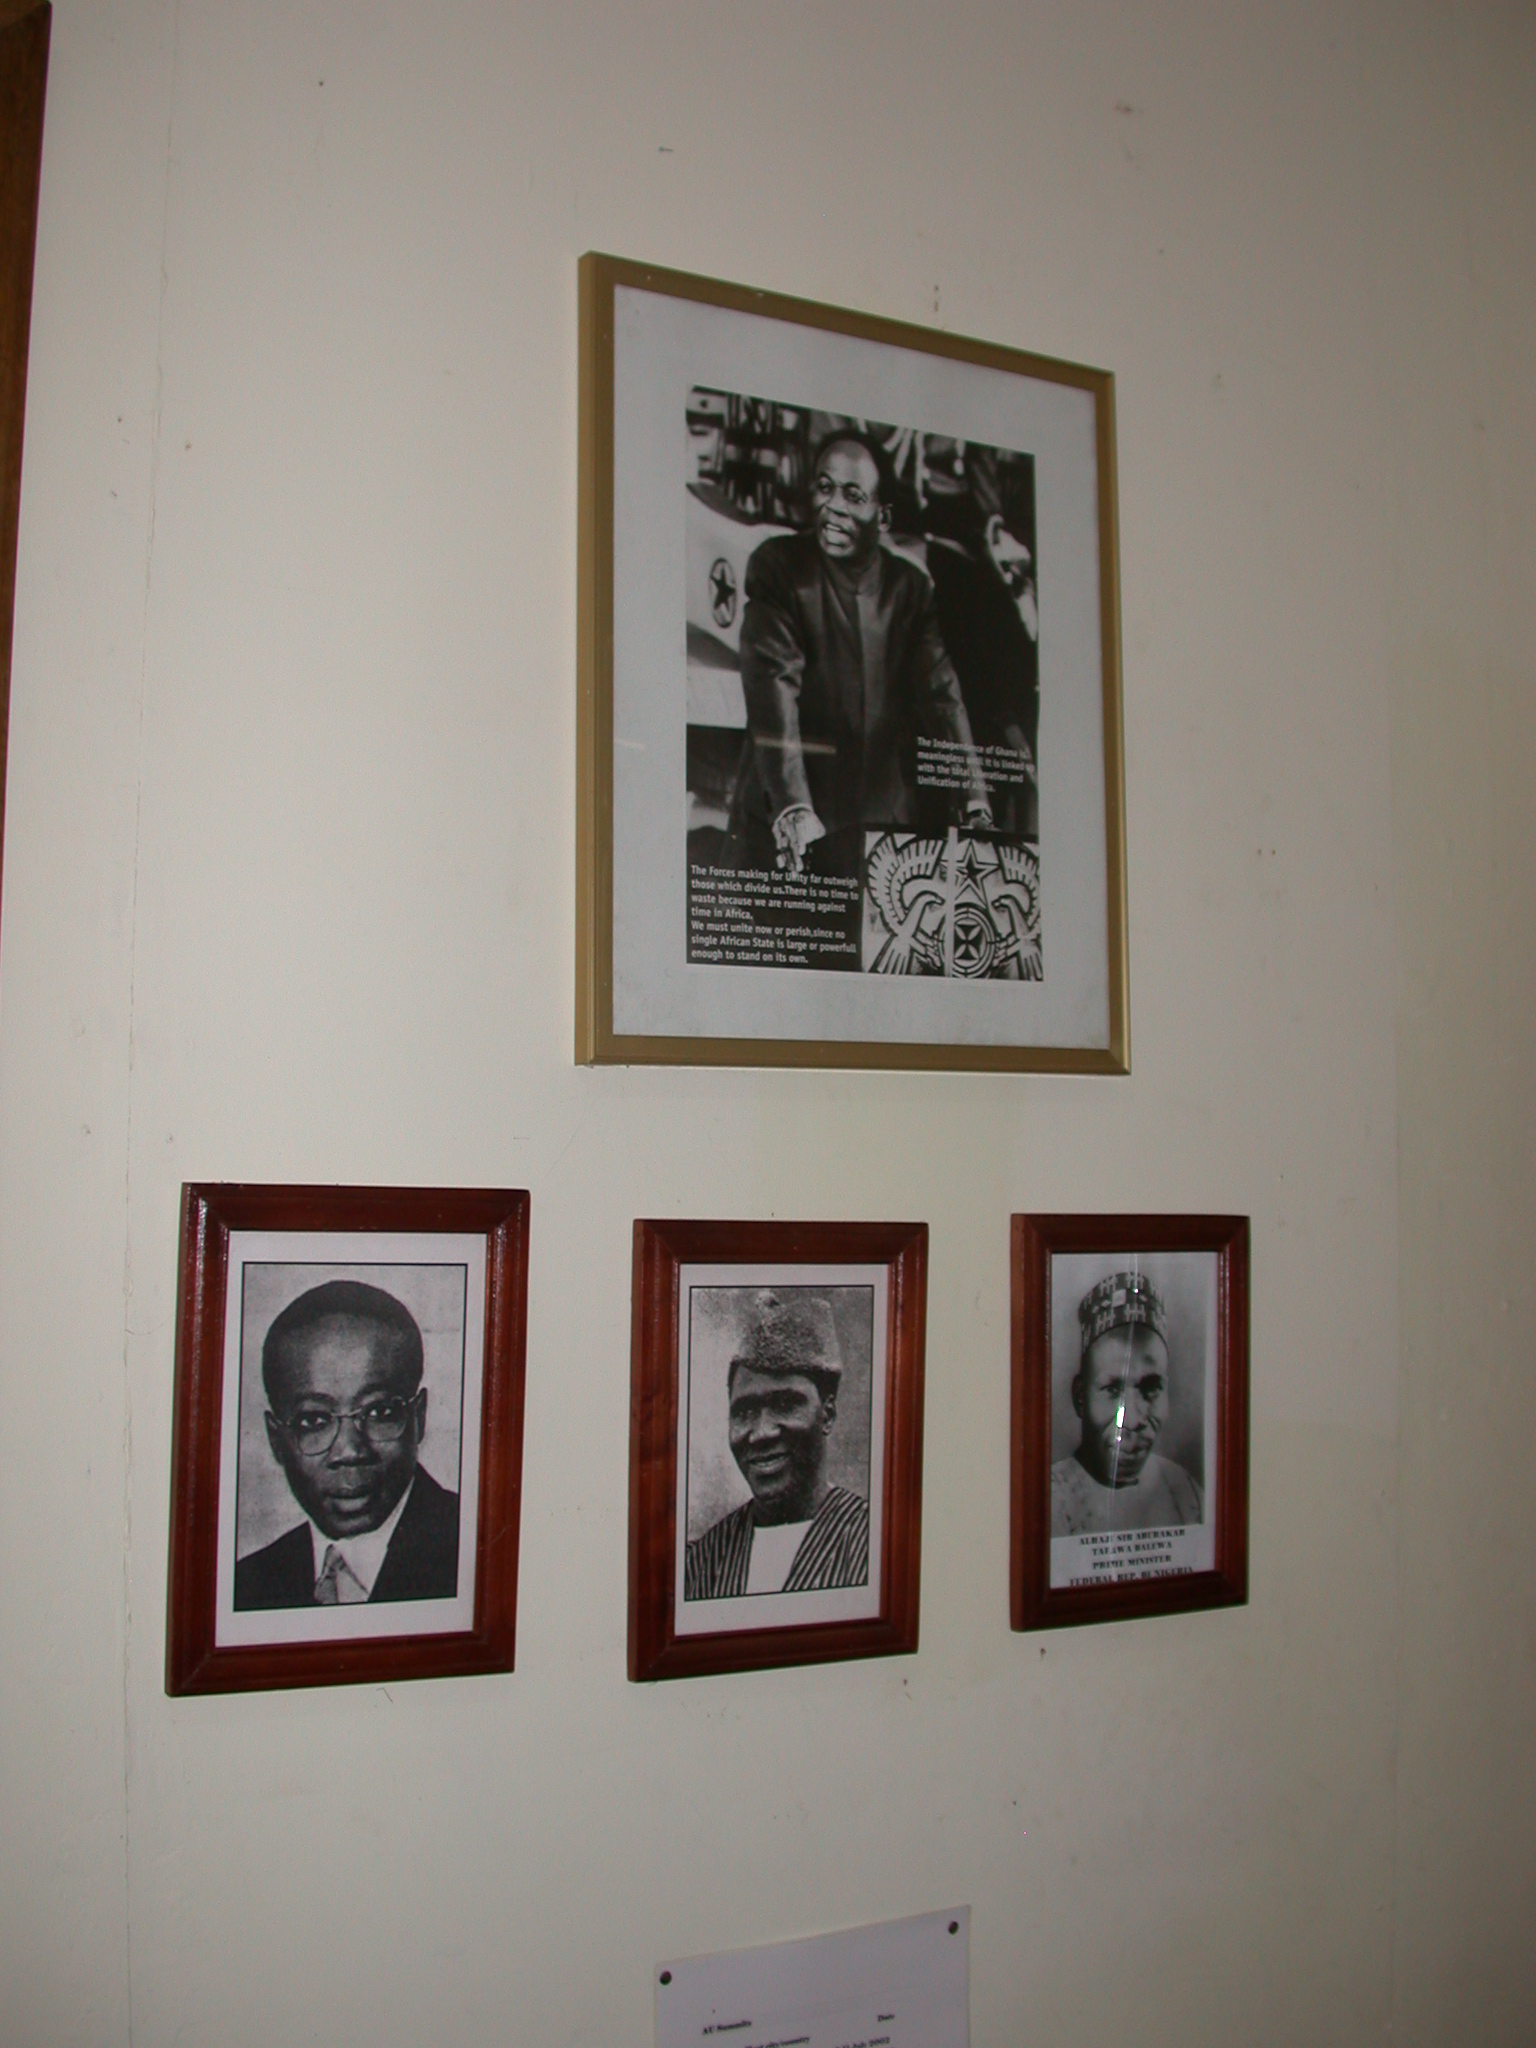 Photographs of African Freedom Fighters and Leaders, WEB DuBois Memorial Centre for Pan African Culture, Accra, Ghana